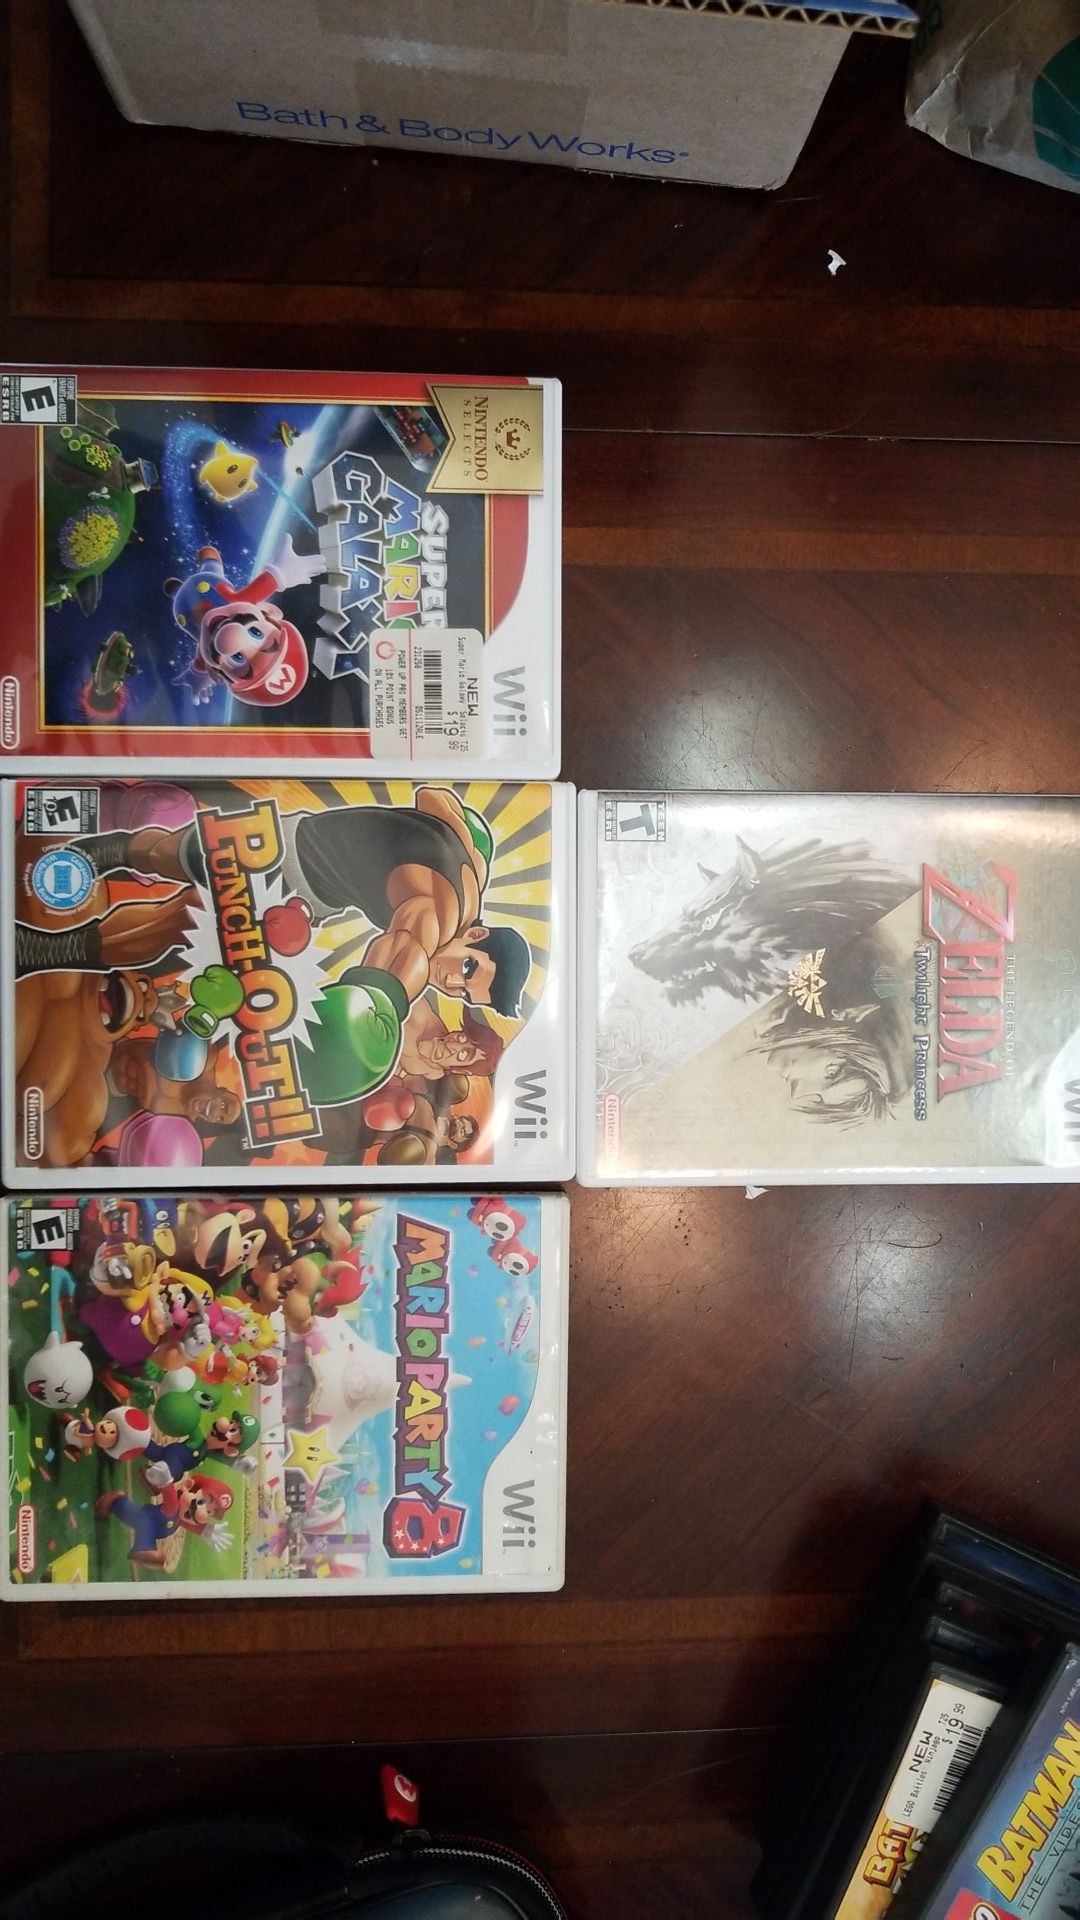 Nintendo wii games. Classic wanted titles. Punch out Mario zelda and mario party